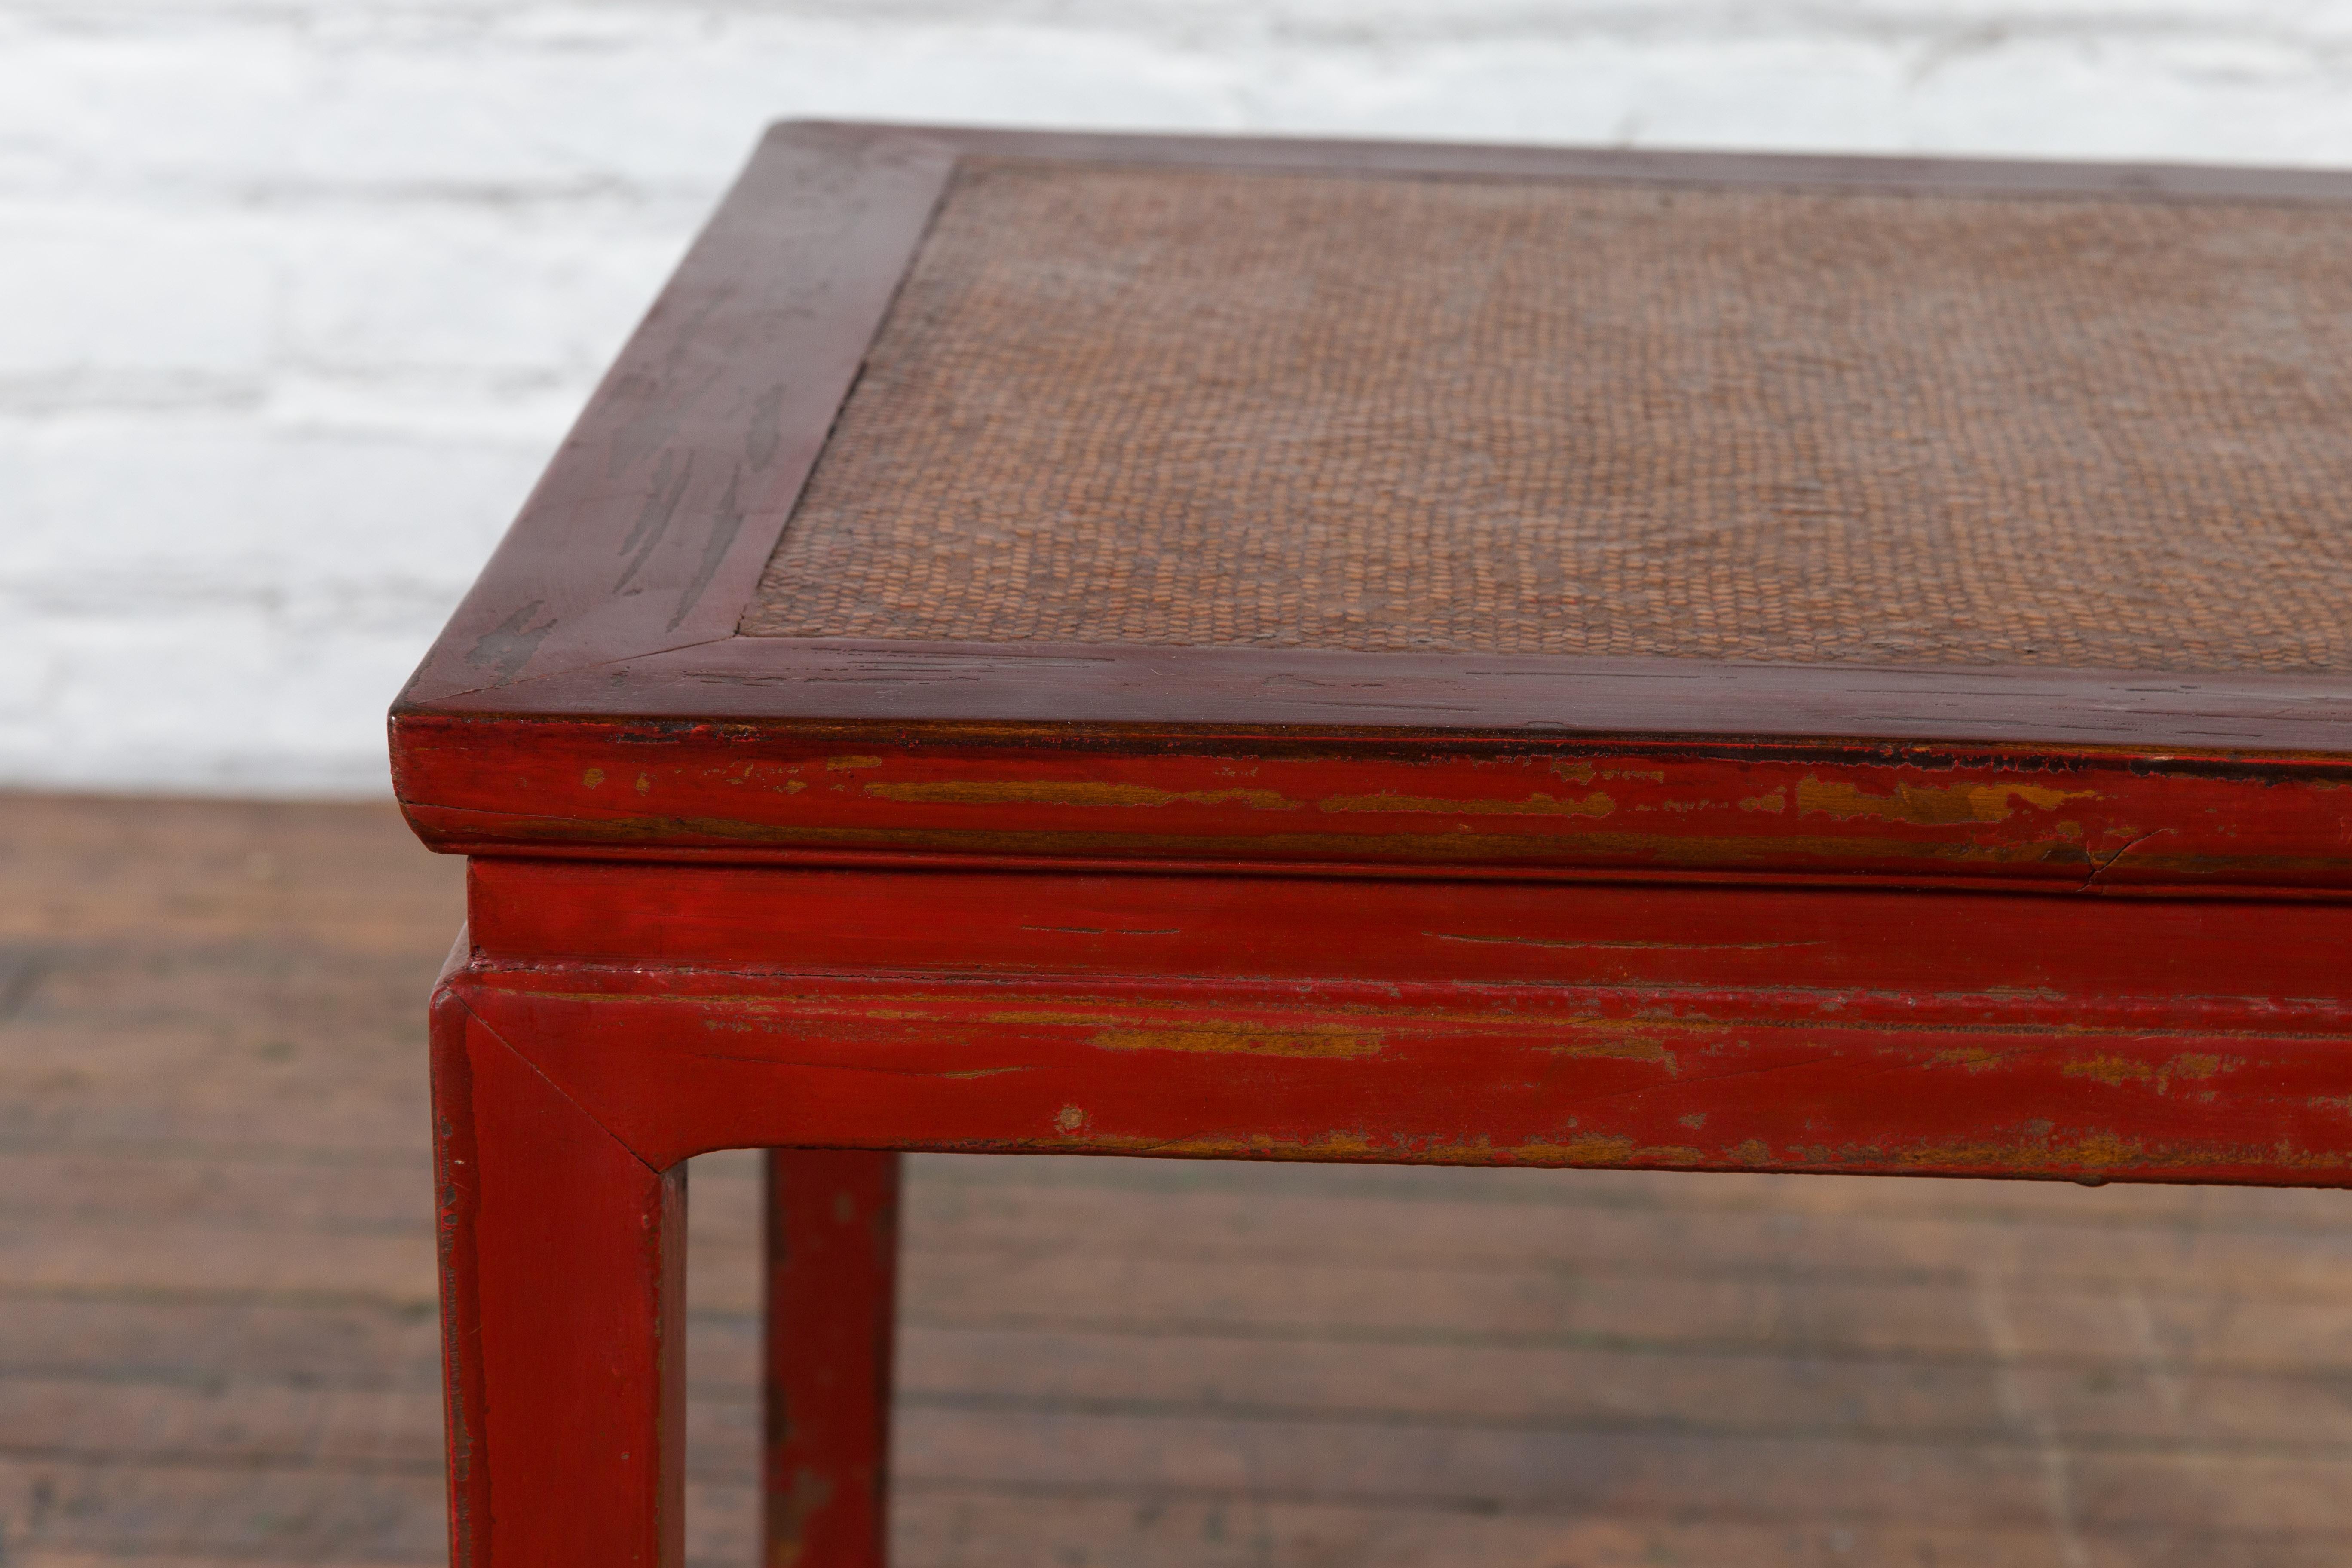 Chinese Qing Dynasty 19th Century Red Lacquer Side Table with Woven Rattan Top For Sale 2